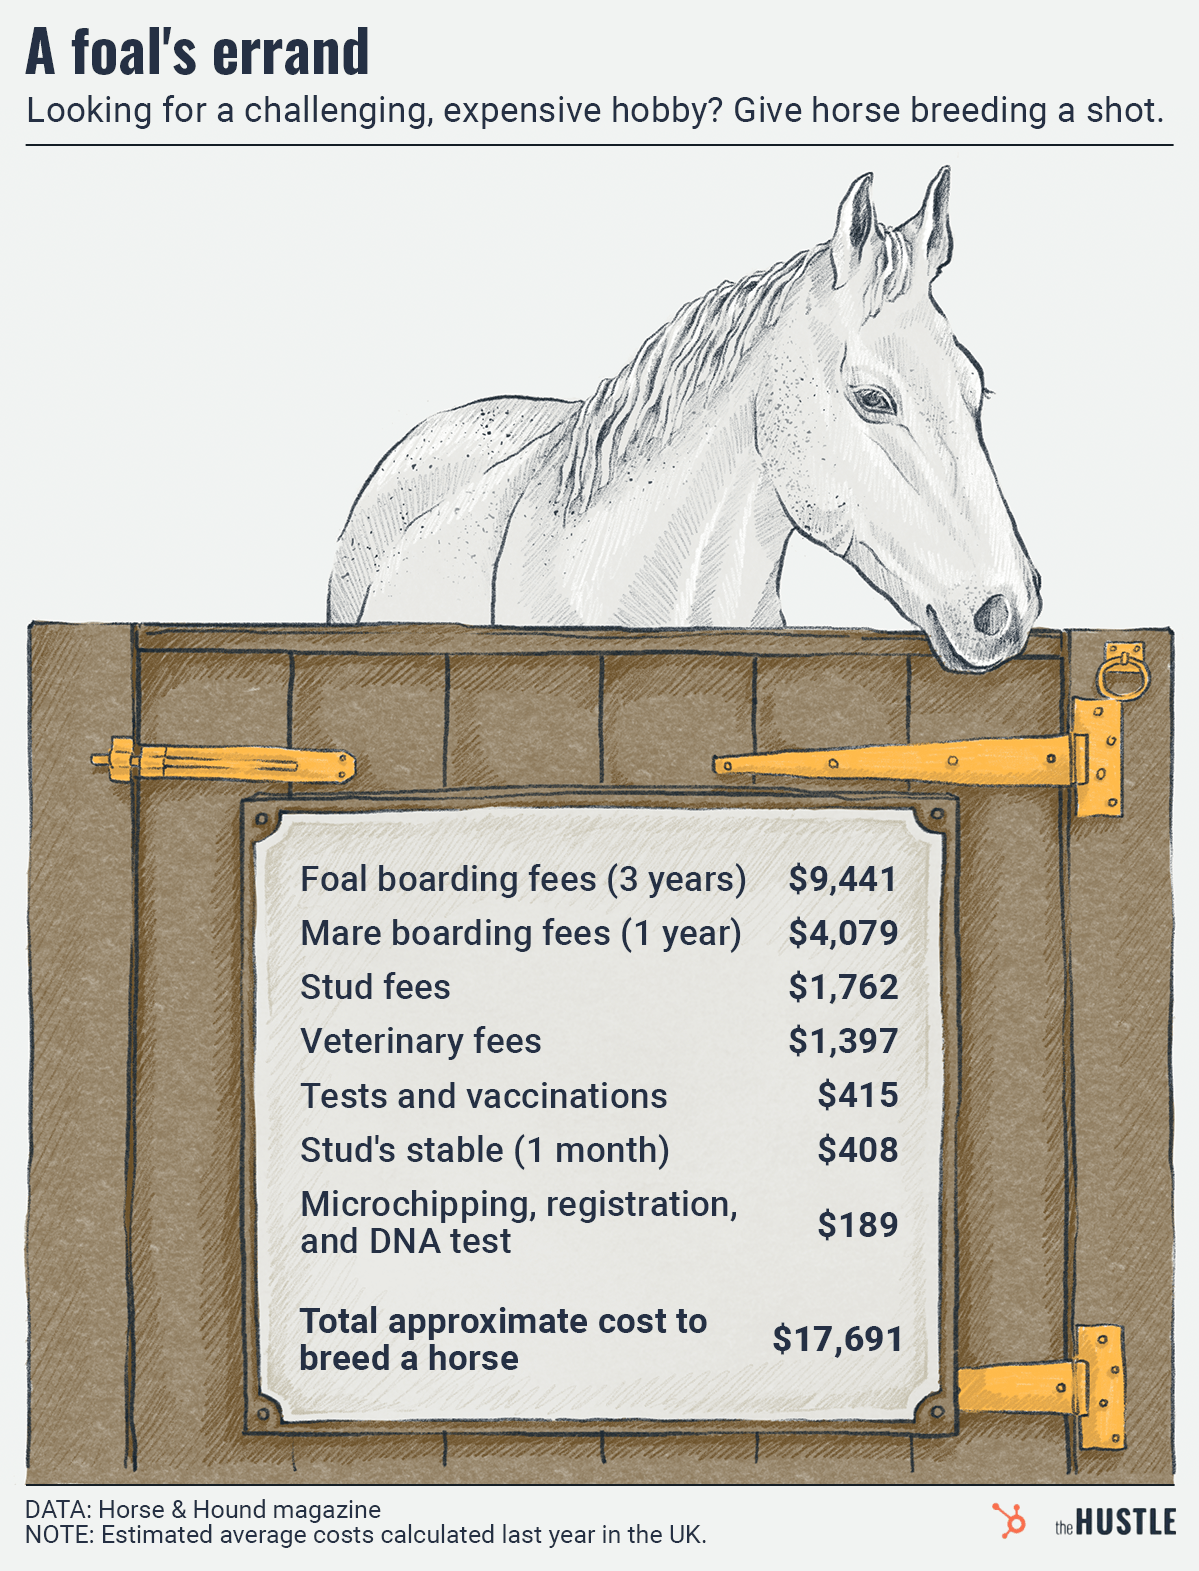 approx cost to breed a horse